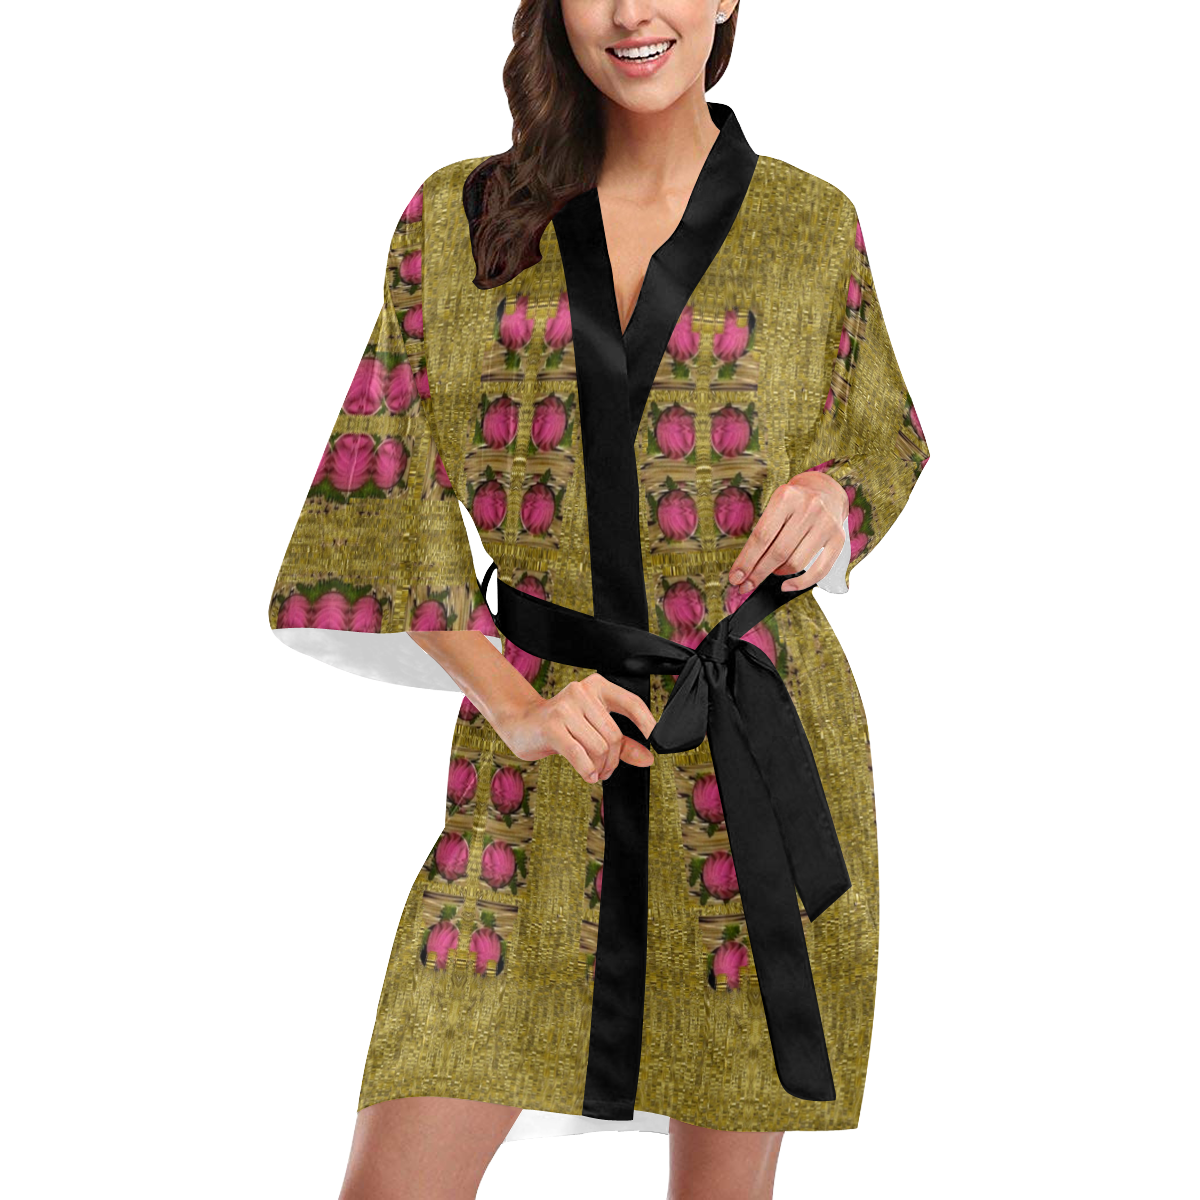 Bloom in gold shine and you shall be strong Kimono Robe